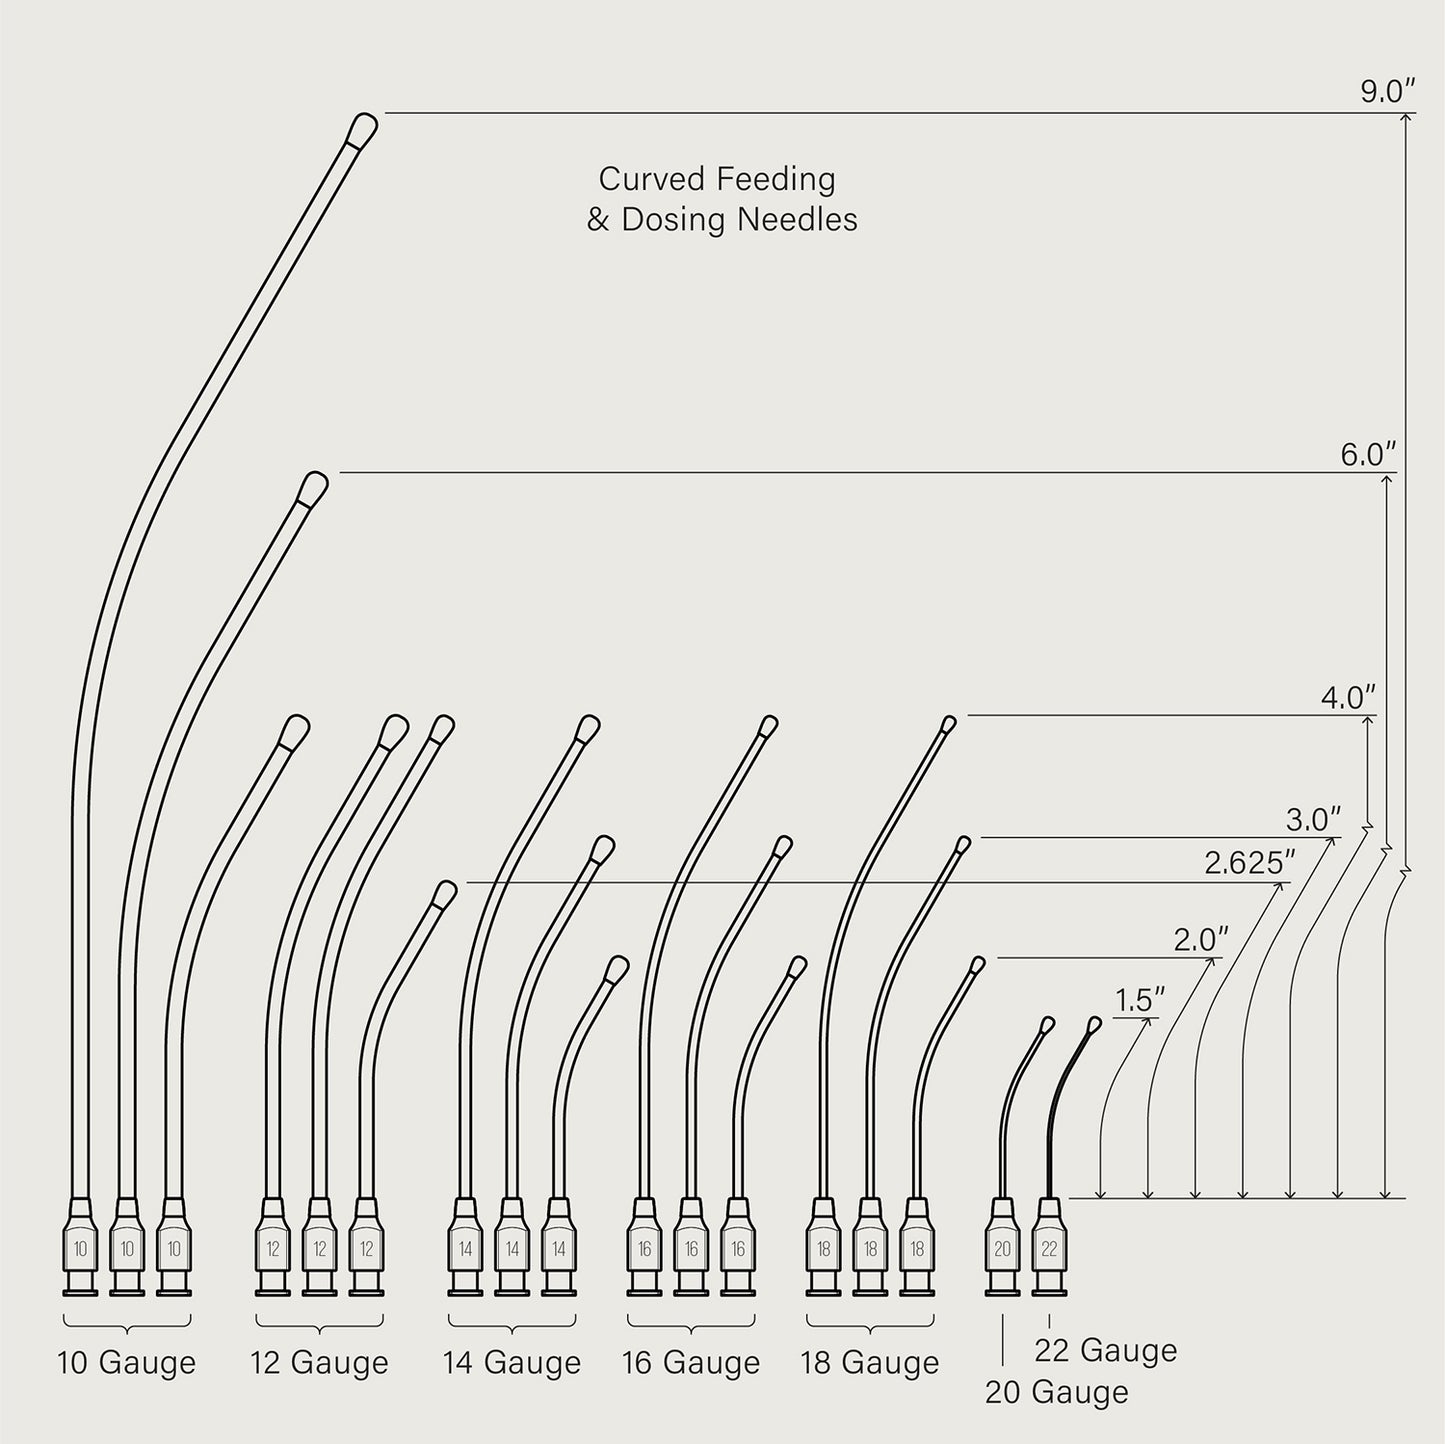 
                  
                    diagram for kvp feeding and dosing needles - curved
                  
                